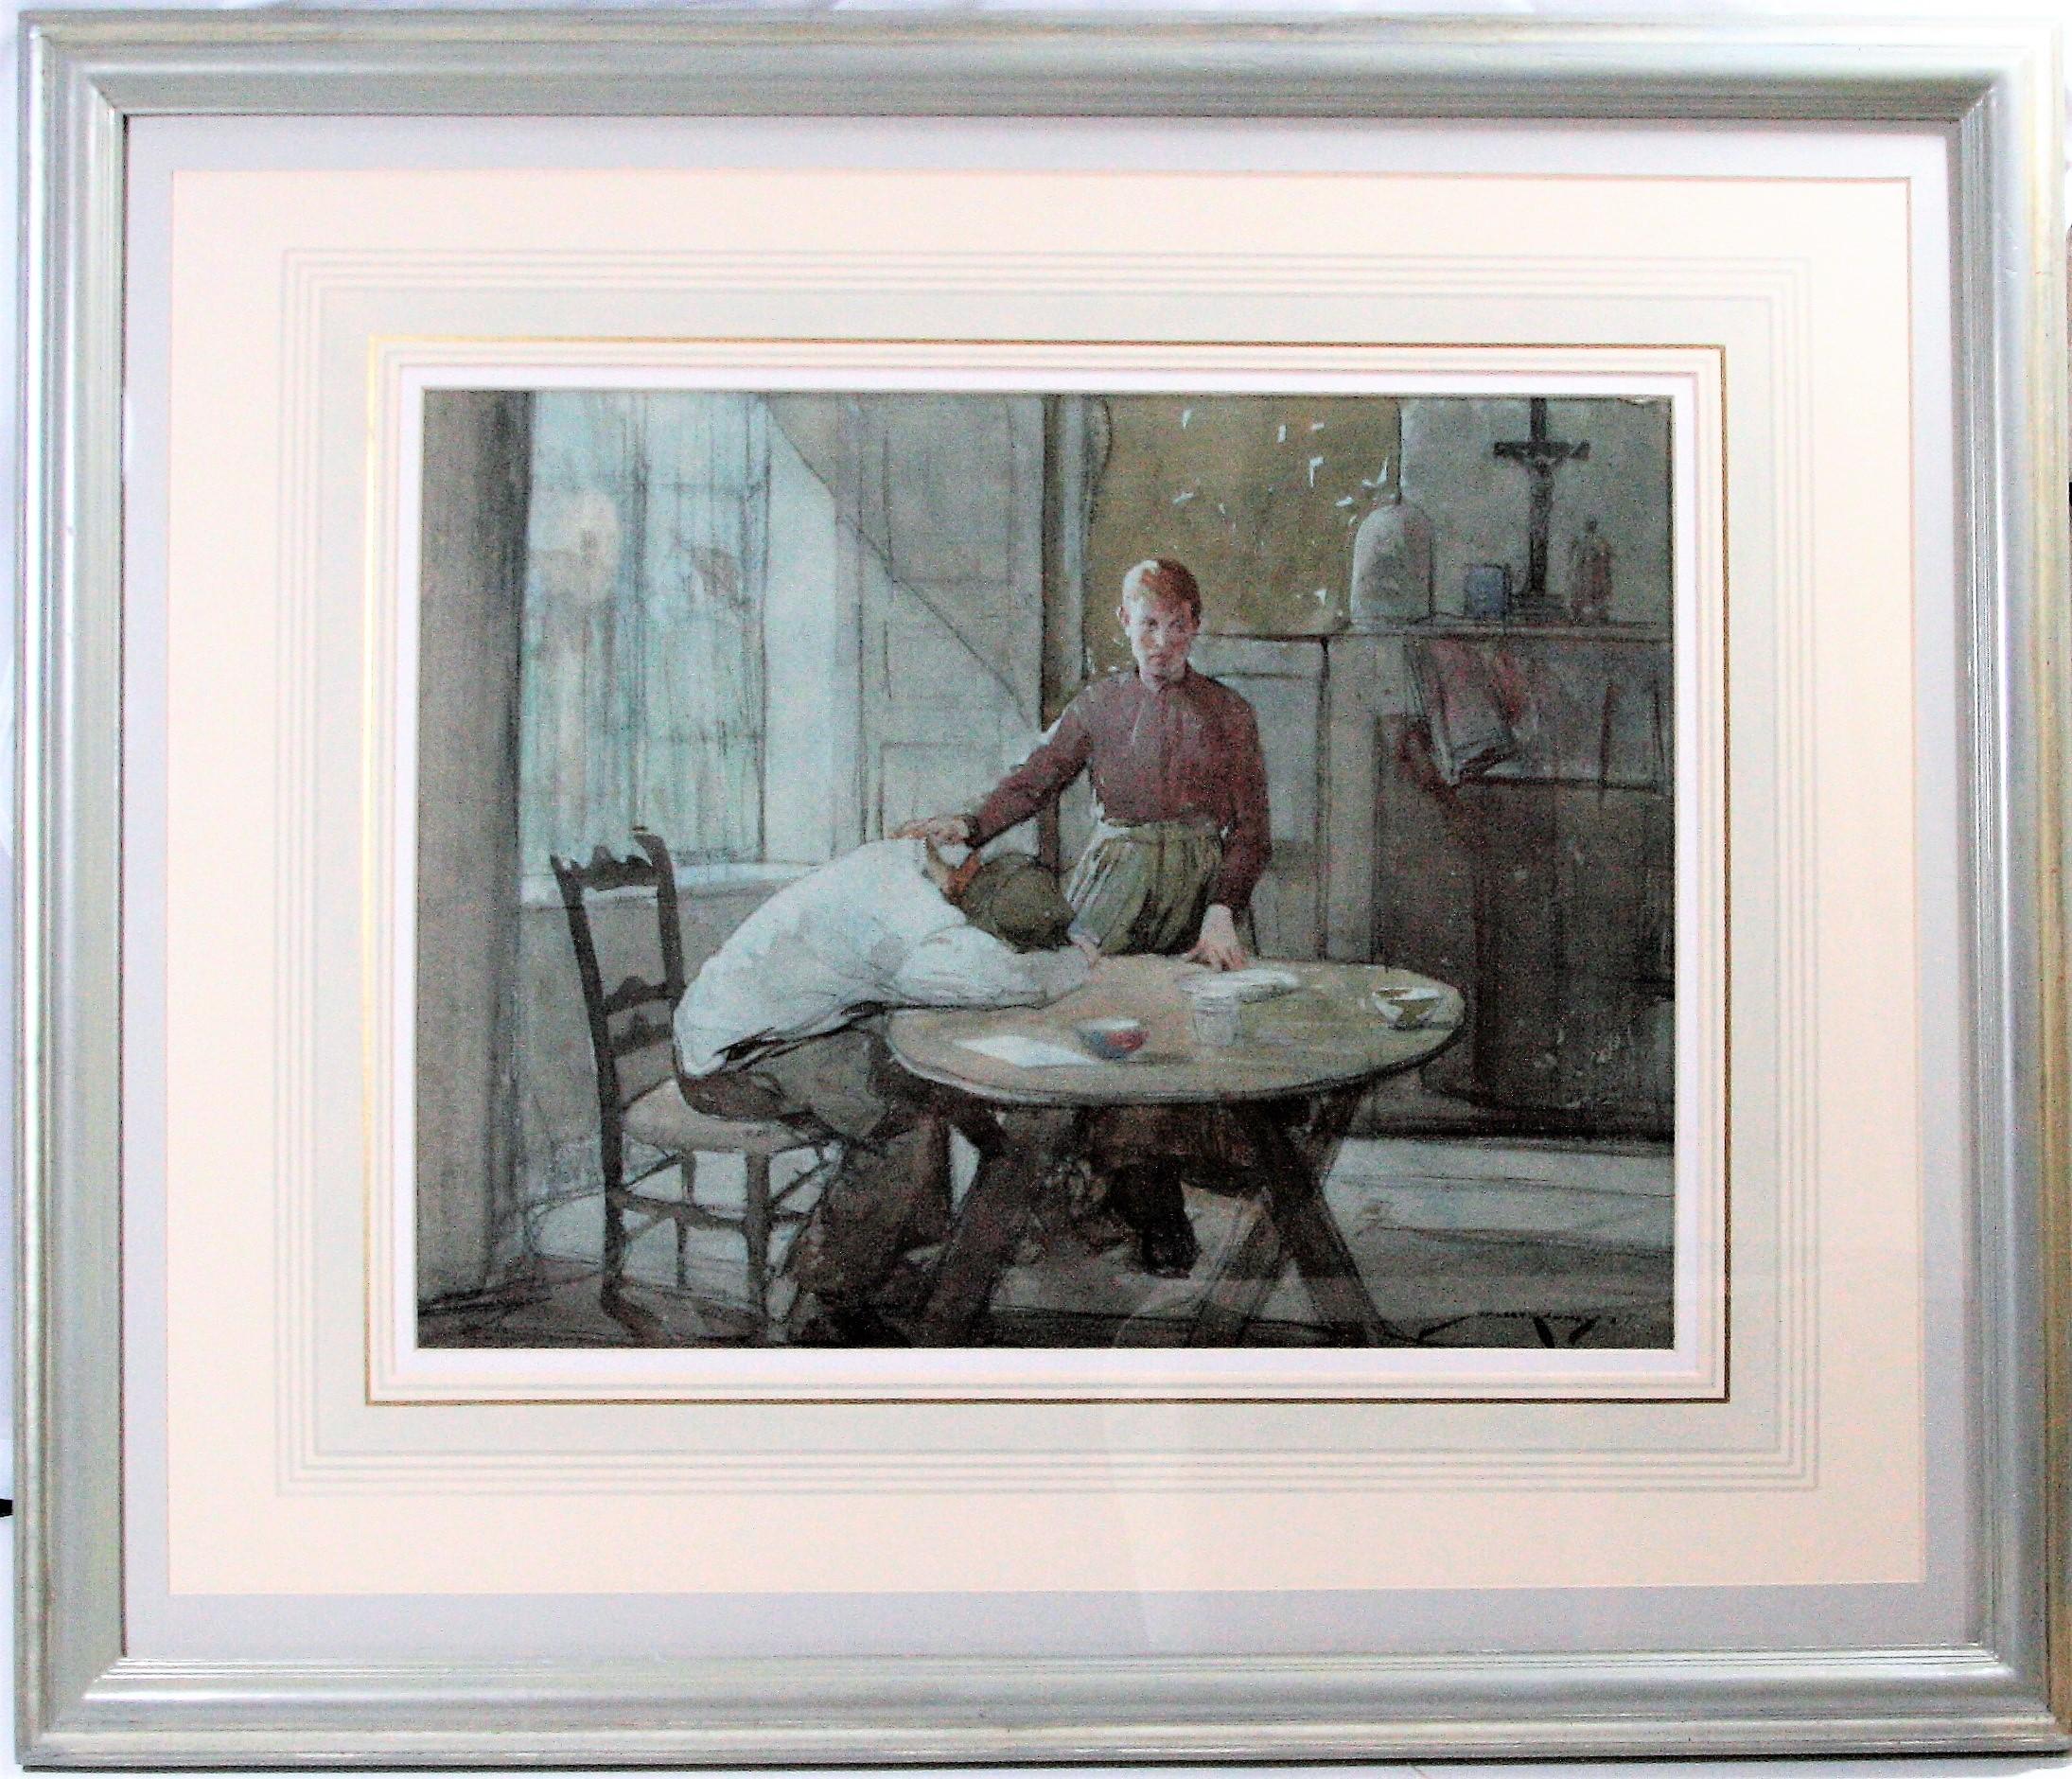 Sorrow. c. 1920. Conte crayon and watercolor on watercolor board. 13 x 17. Signed lower right; titled verso. The muted watercolor tones intensify the man's despair; but the sunlight coming through the window suggests hope.  Housed in an elegant